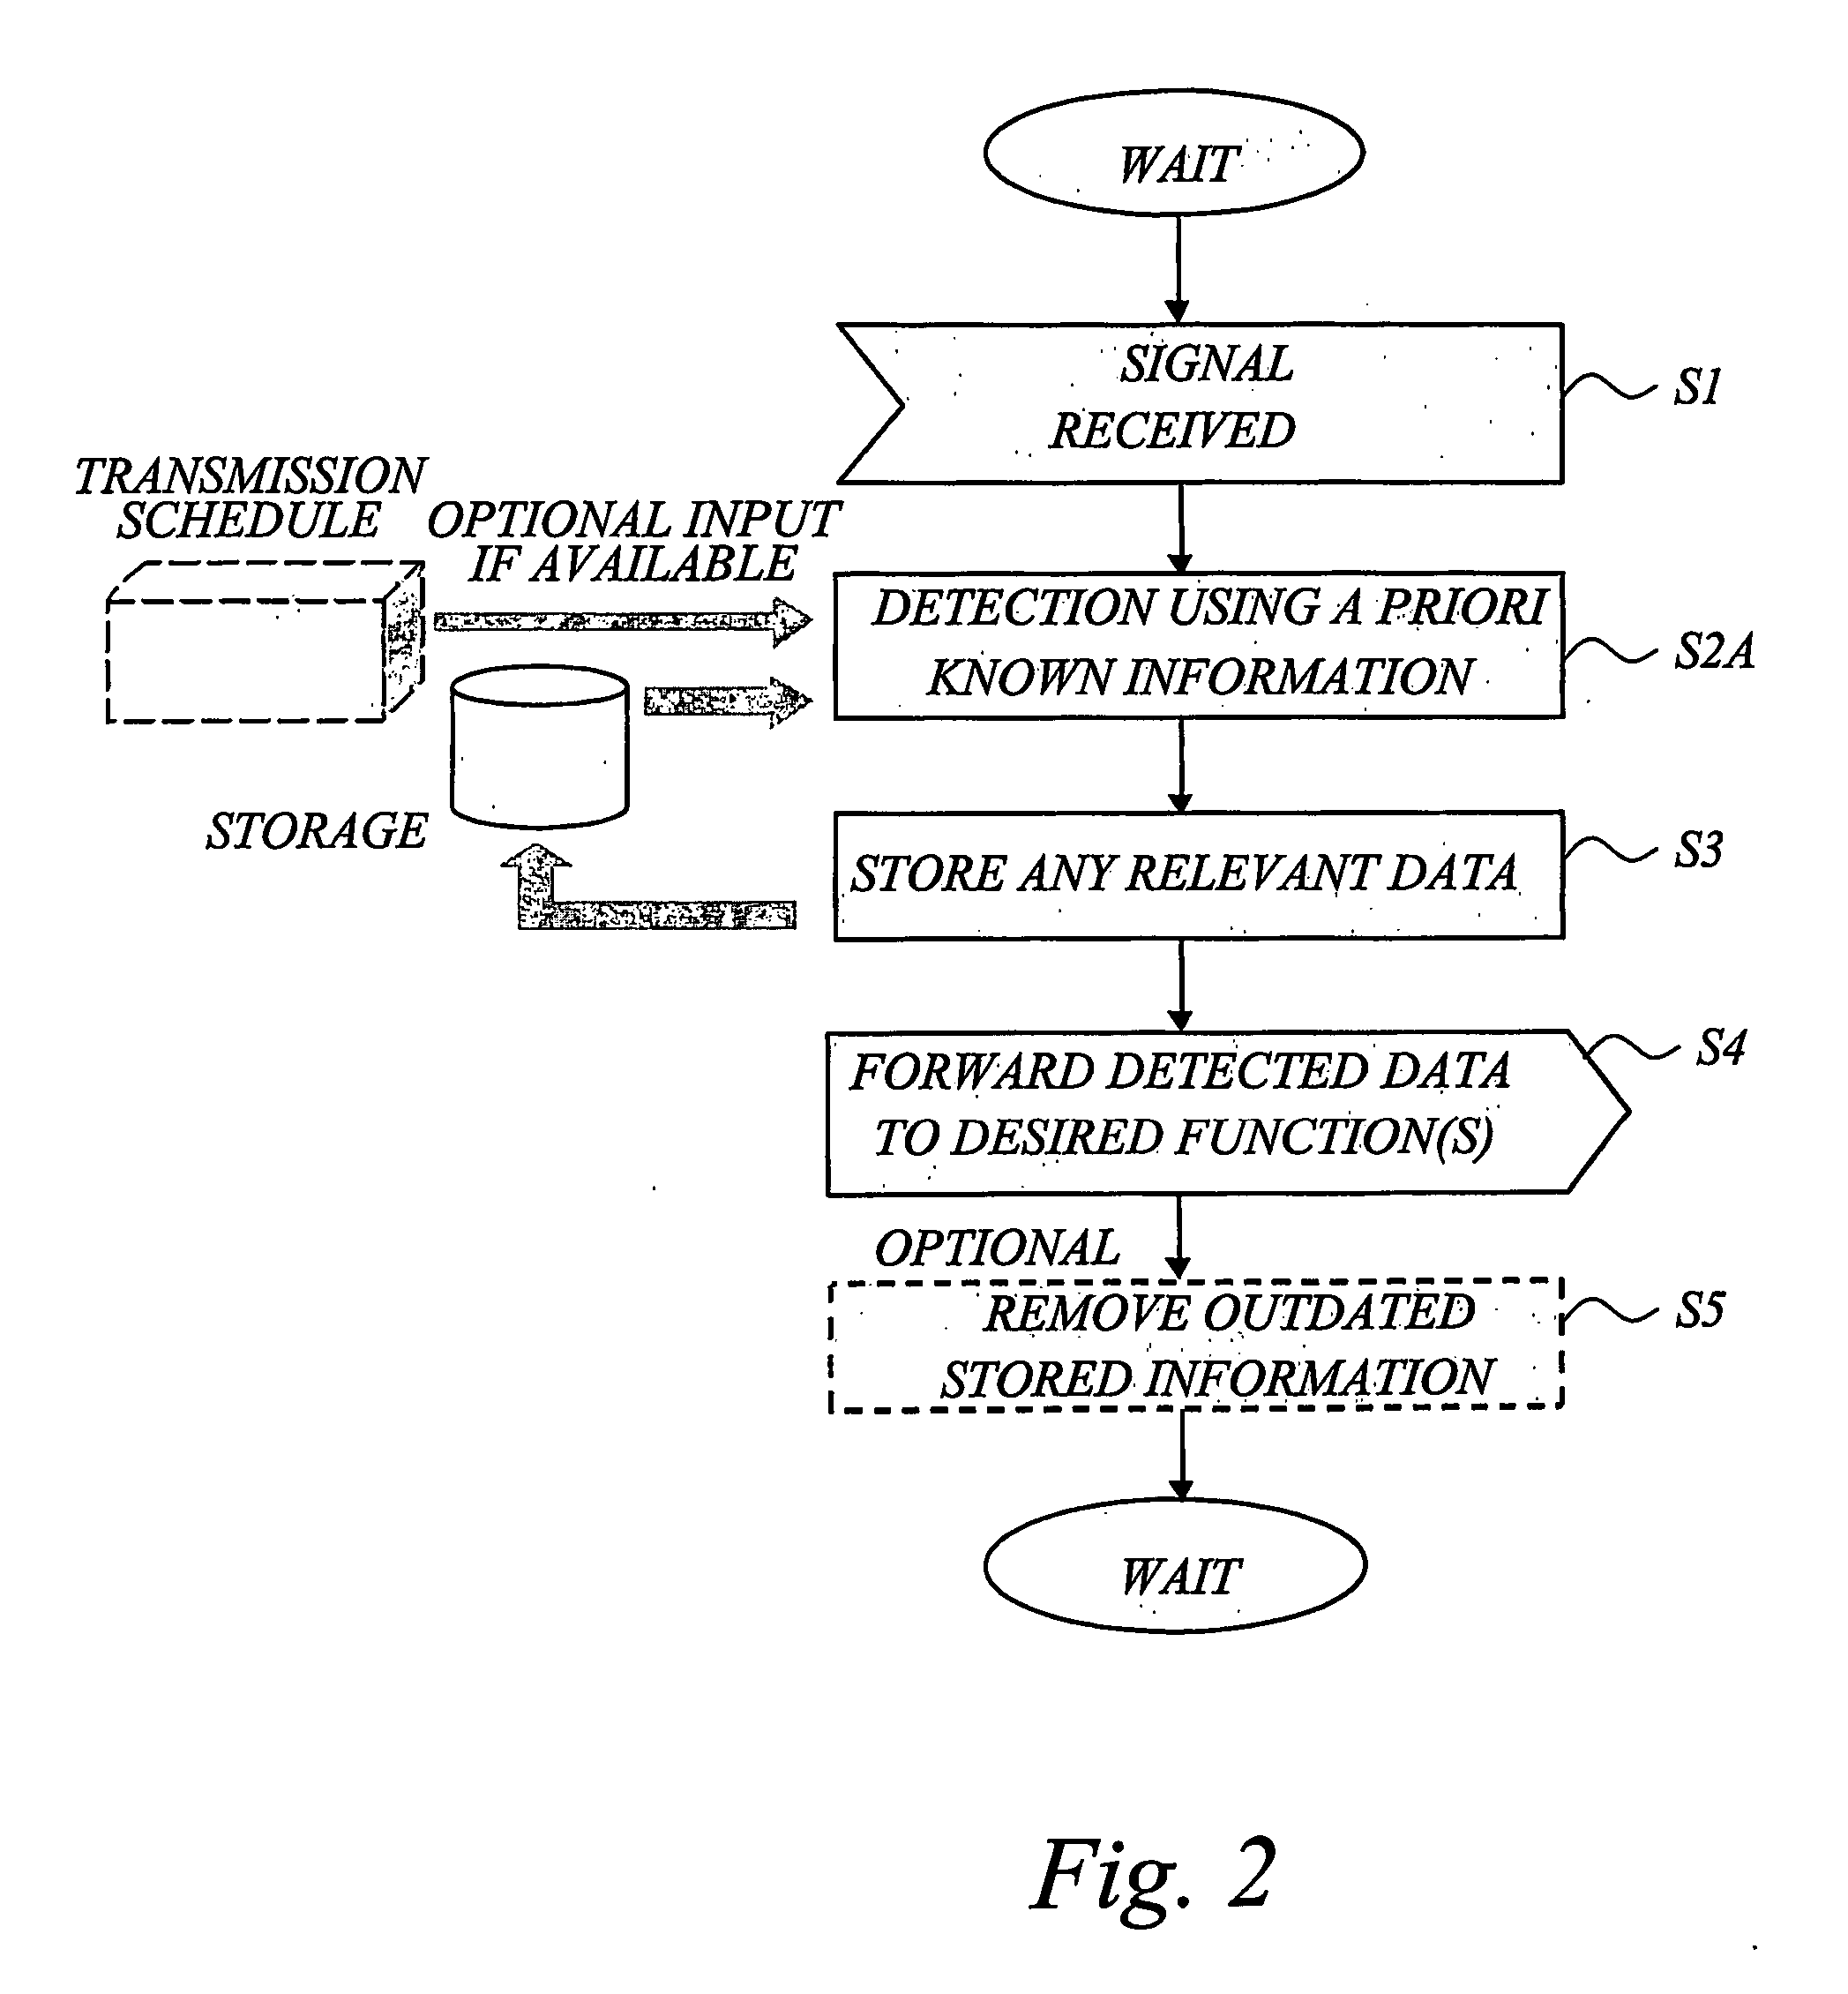 Interference cancellation in wireless relaying networks